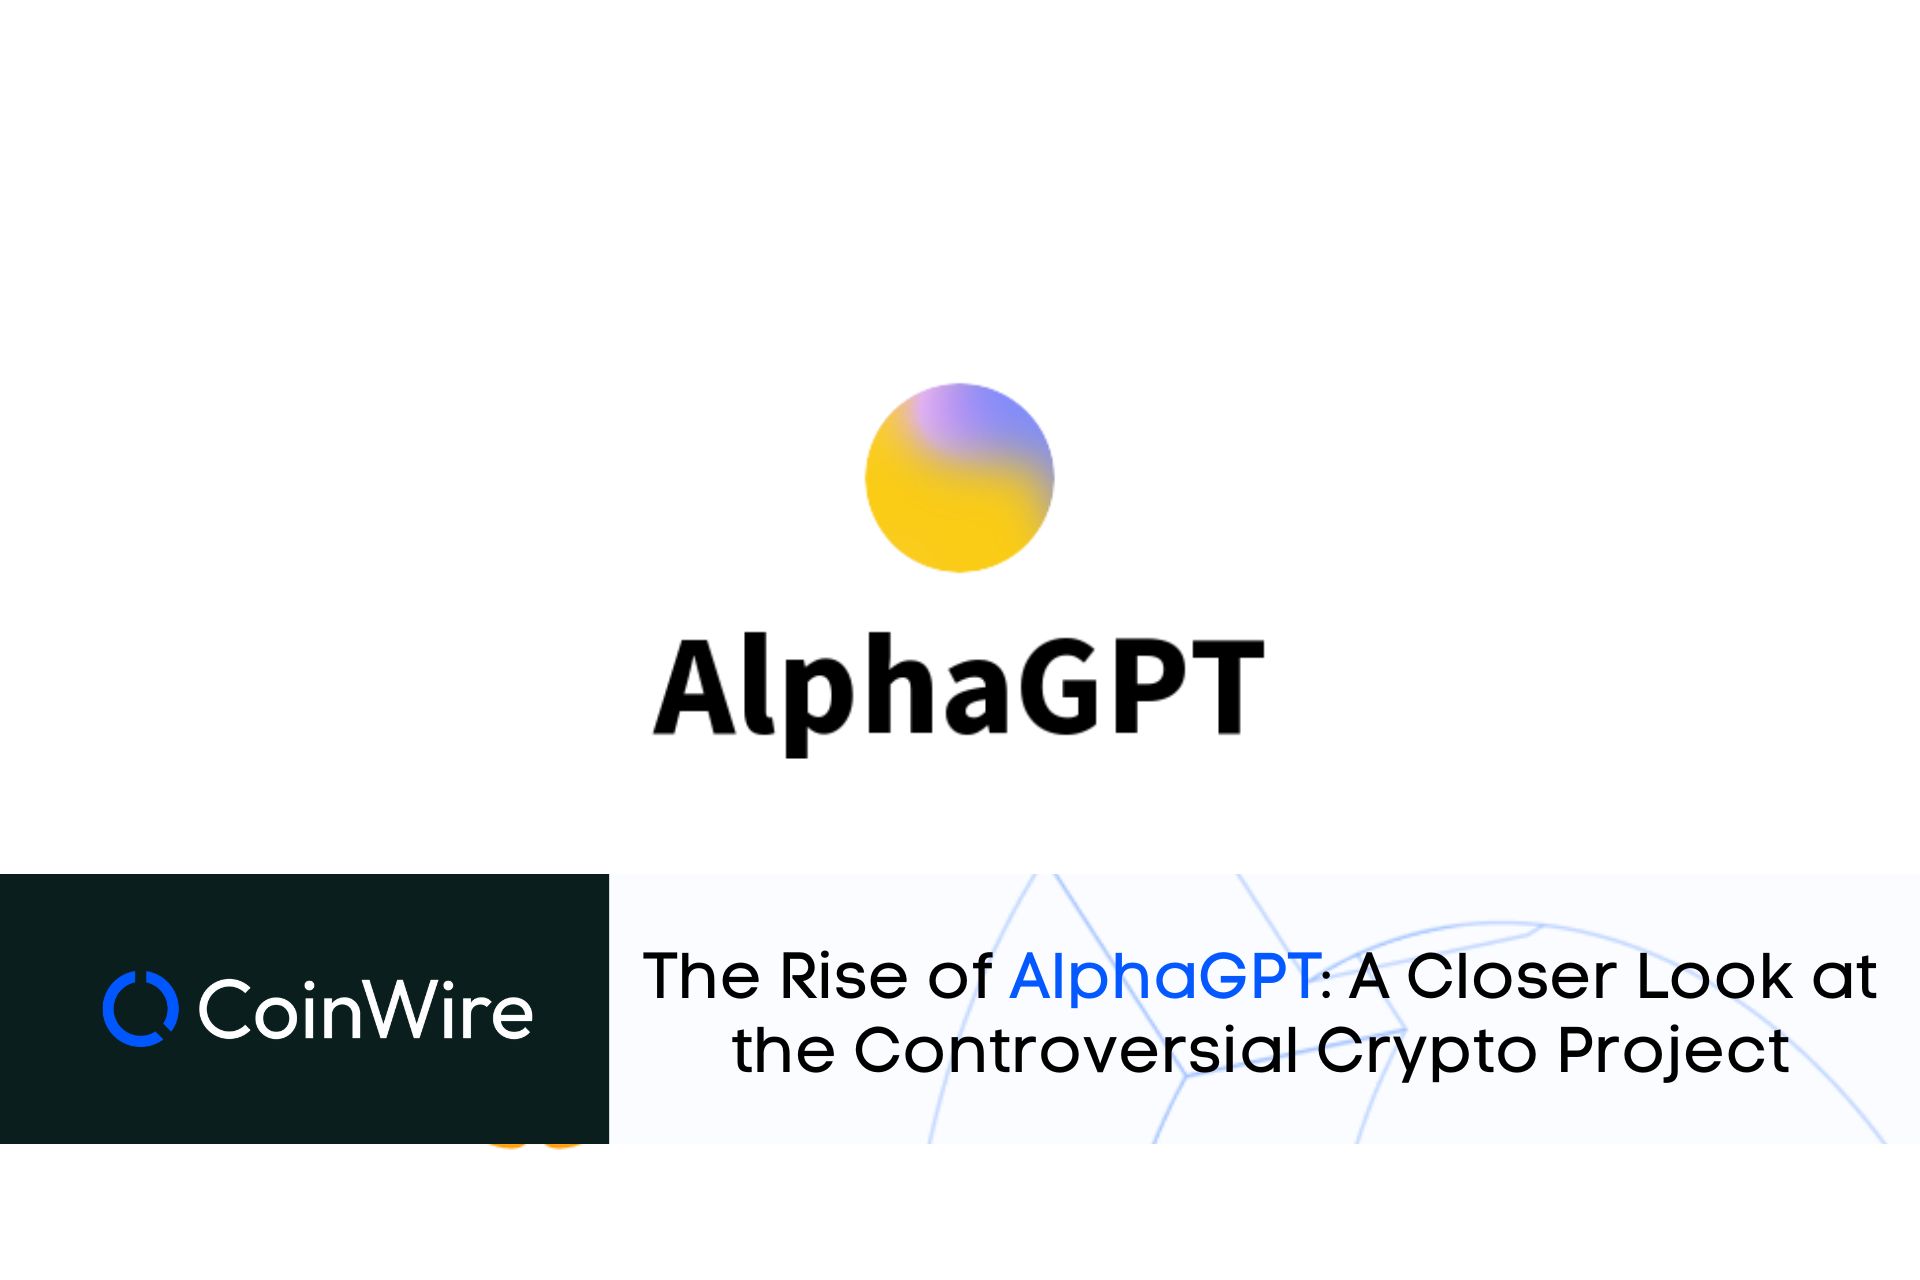 The Rise Of Alphagpt: A Closer Look At The Controversial Crypto Project